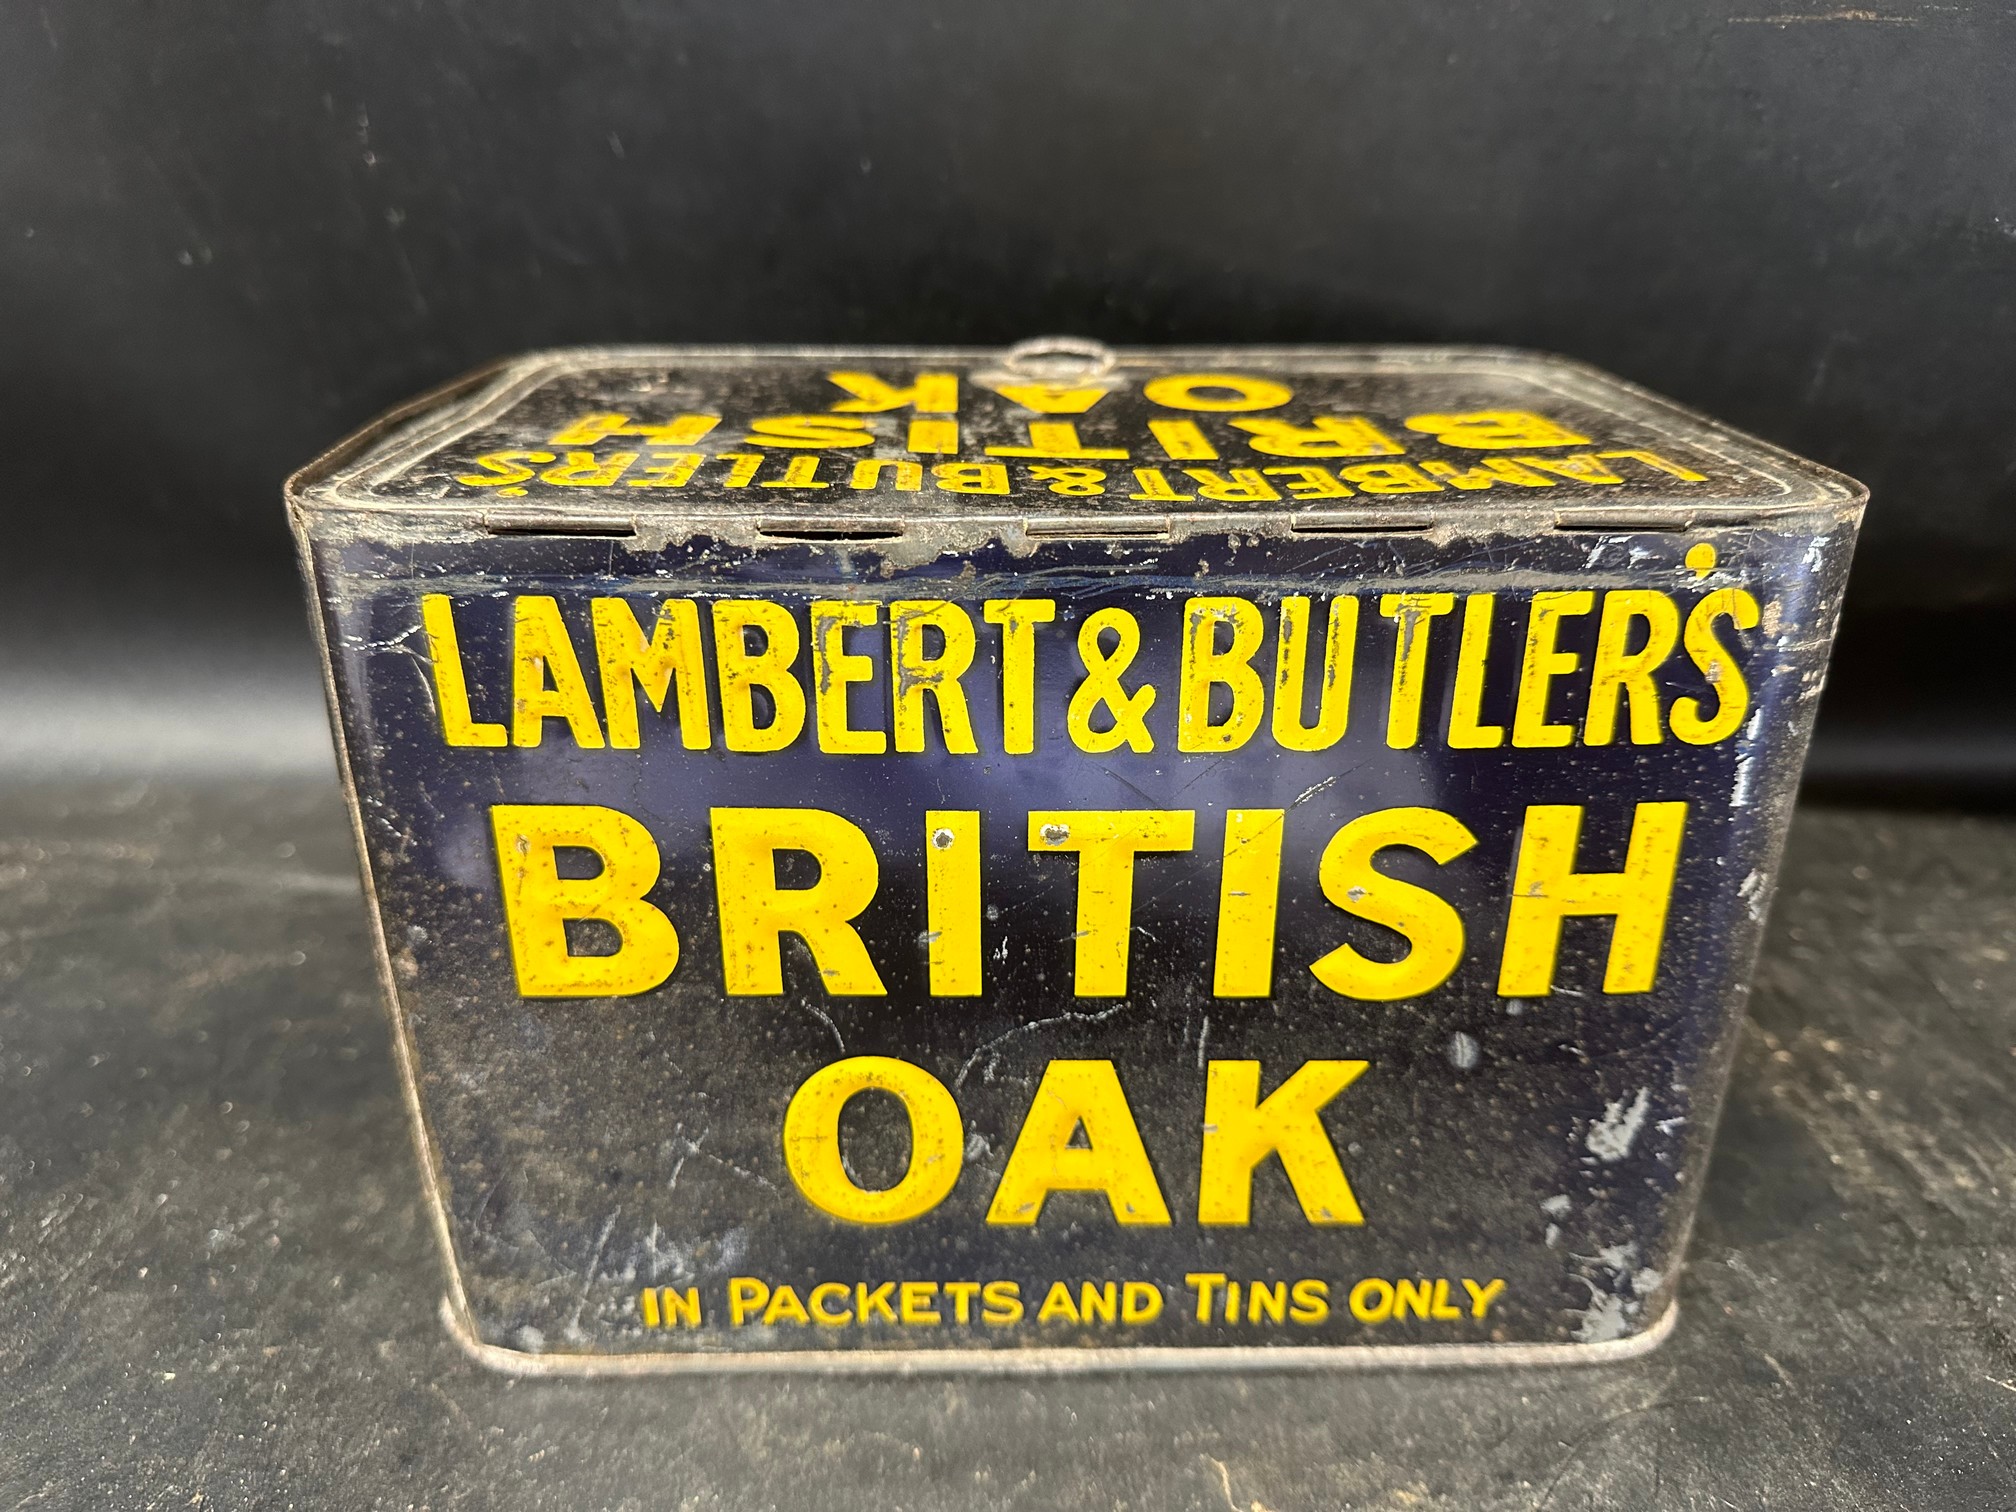 A Lambert & Butler's British Oak in packets and tins only counter box for "British Oak Shag", issued - Image 5 of 8